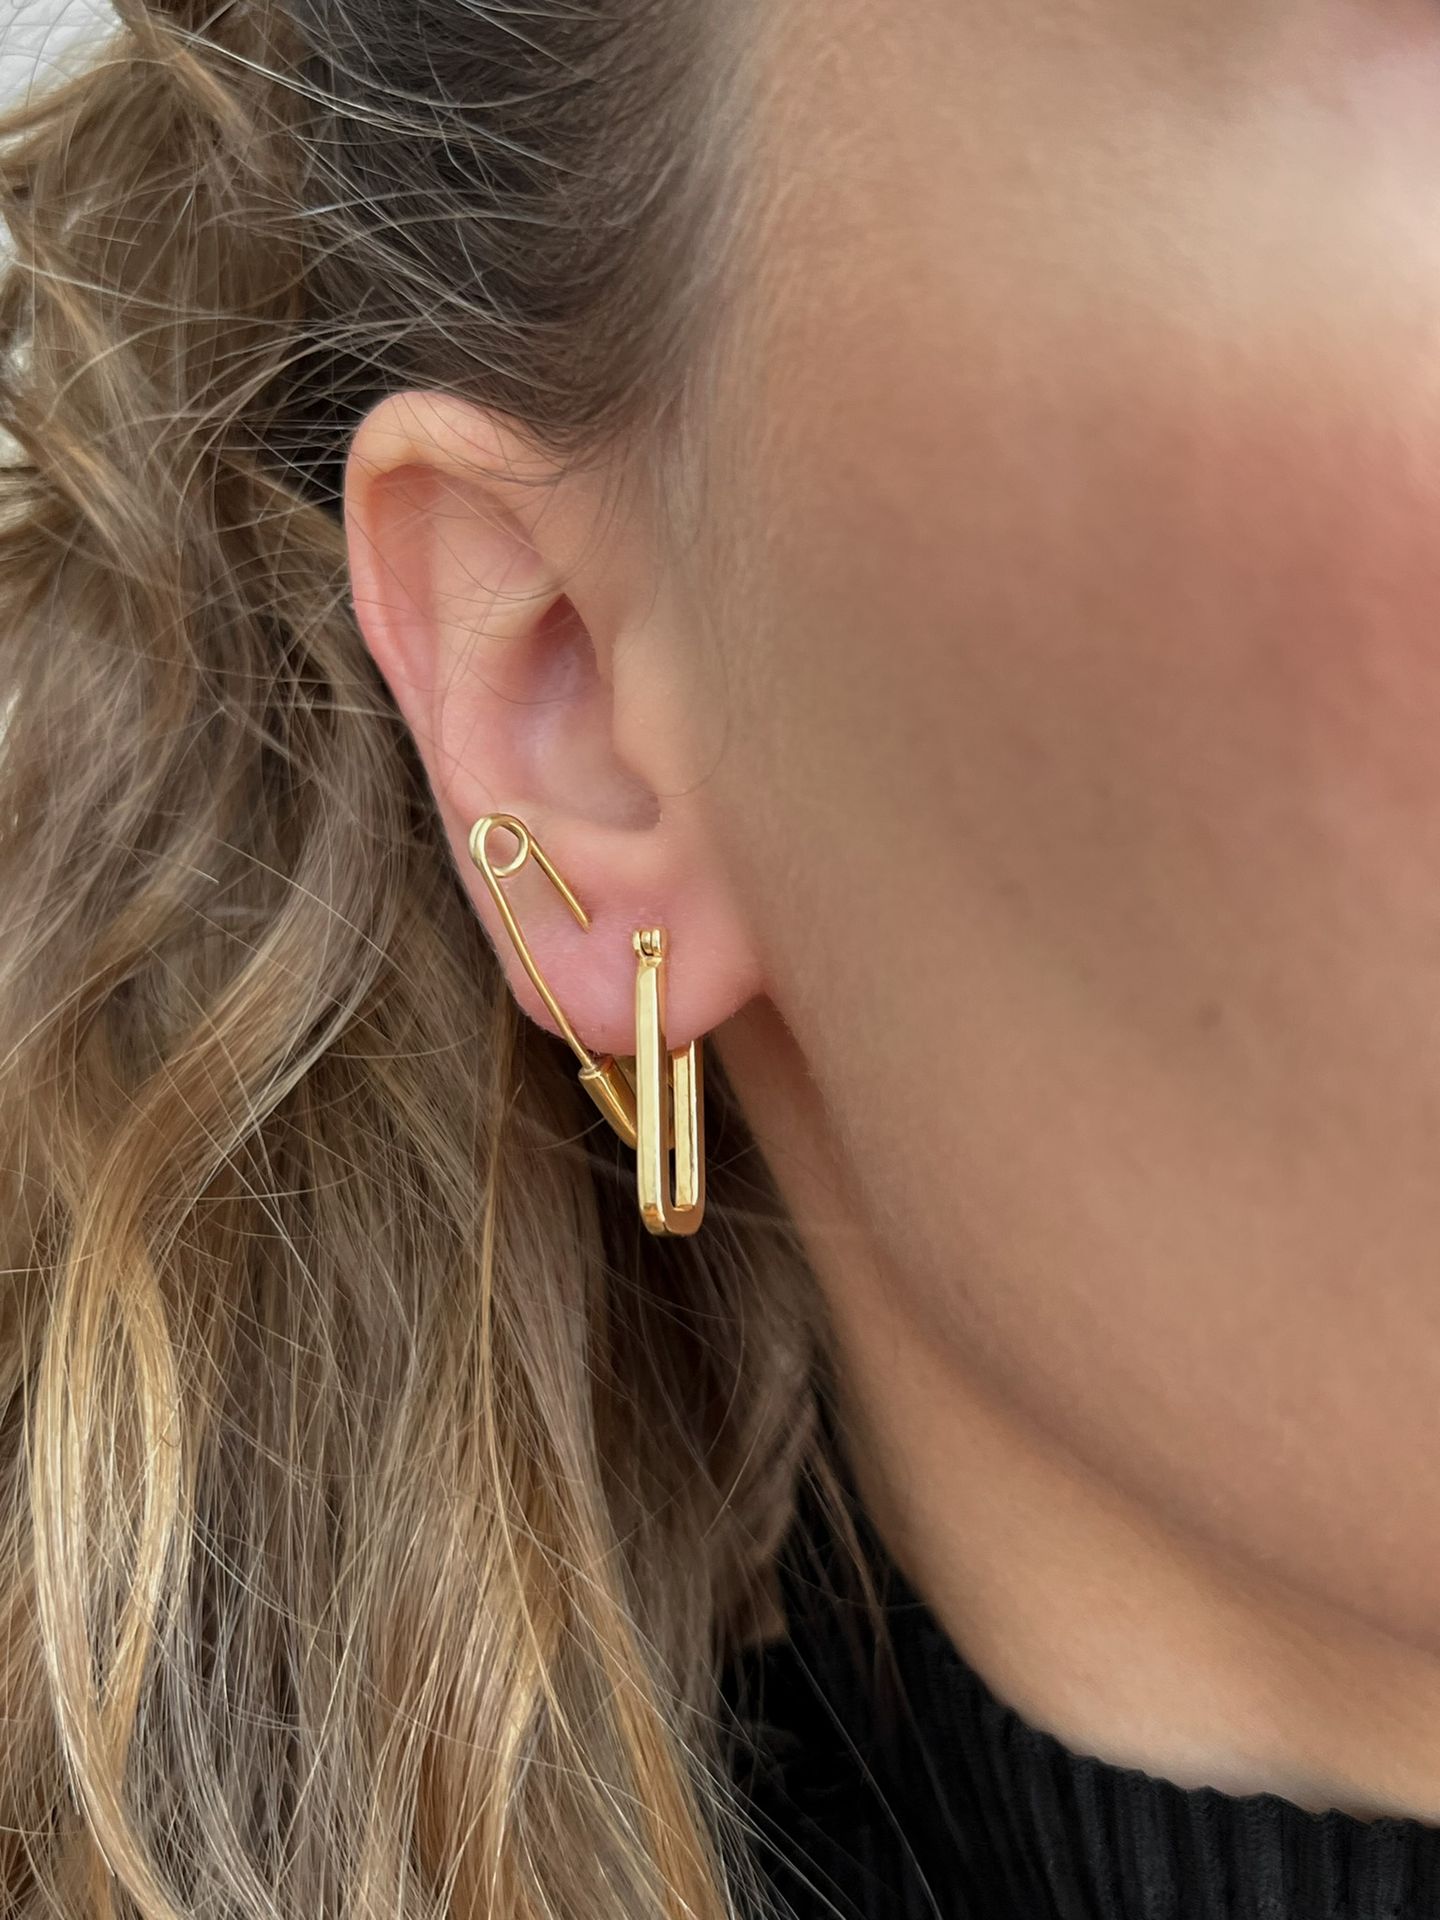 Attached 2 U Gold earring (Right)